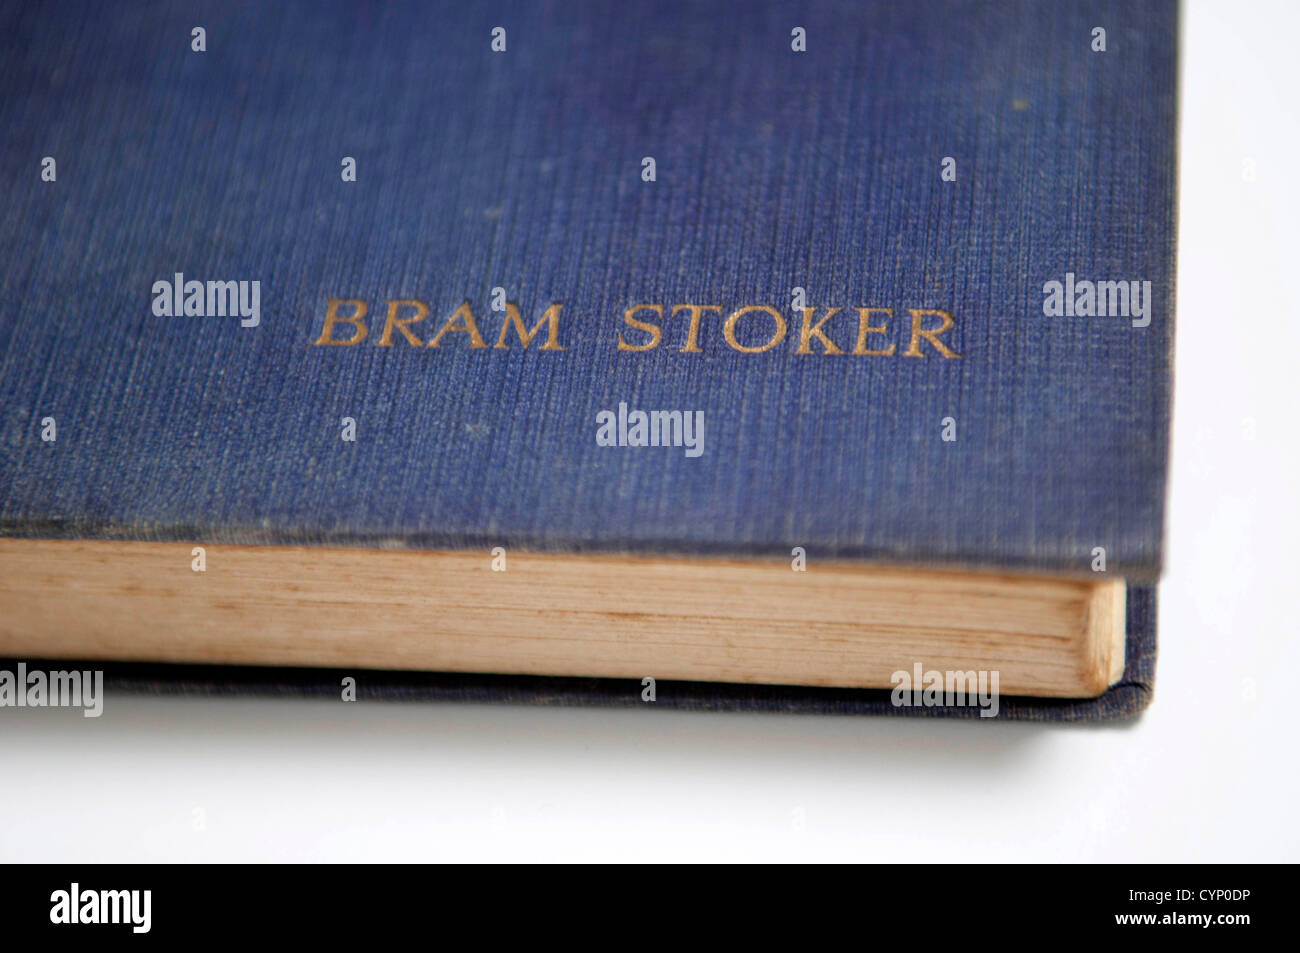 Bram Stoker books - UK - 8th November 2012 : The Lair of the White Worm book by the celebrated novelist Bram Stoker on what would have been his 165th birthday today. This rare book from 1911 was published by W.Foulsham and Co Ltd in the UK a year before his death. Stock Photo